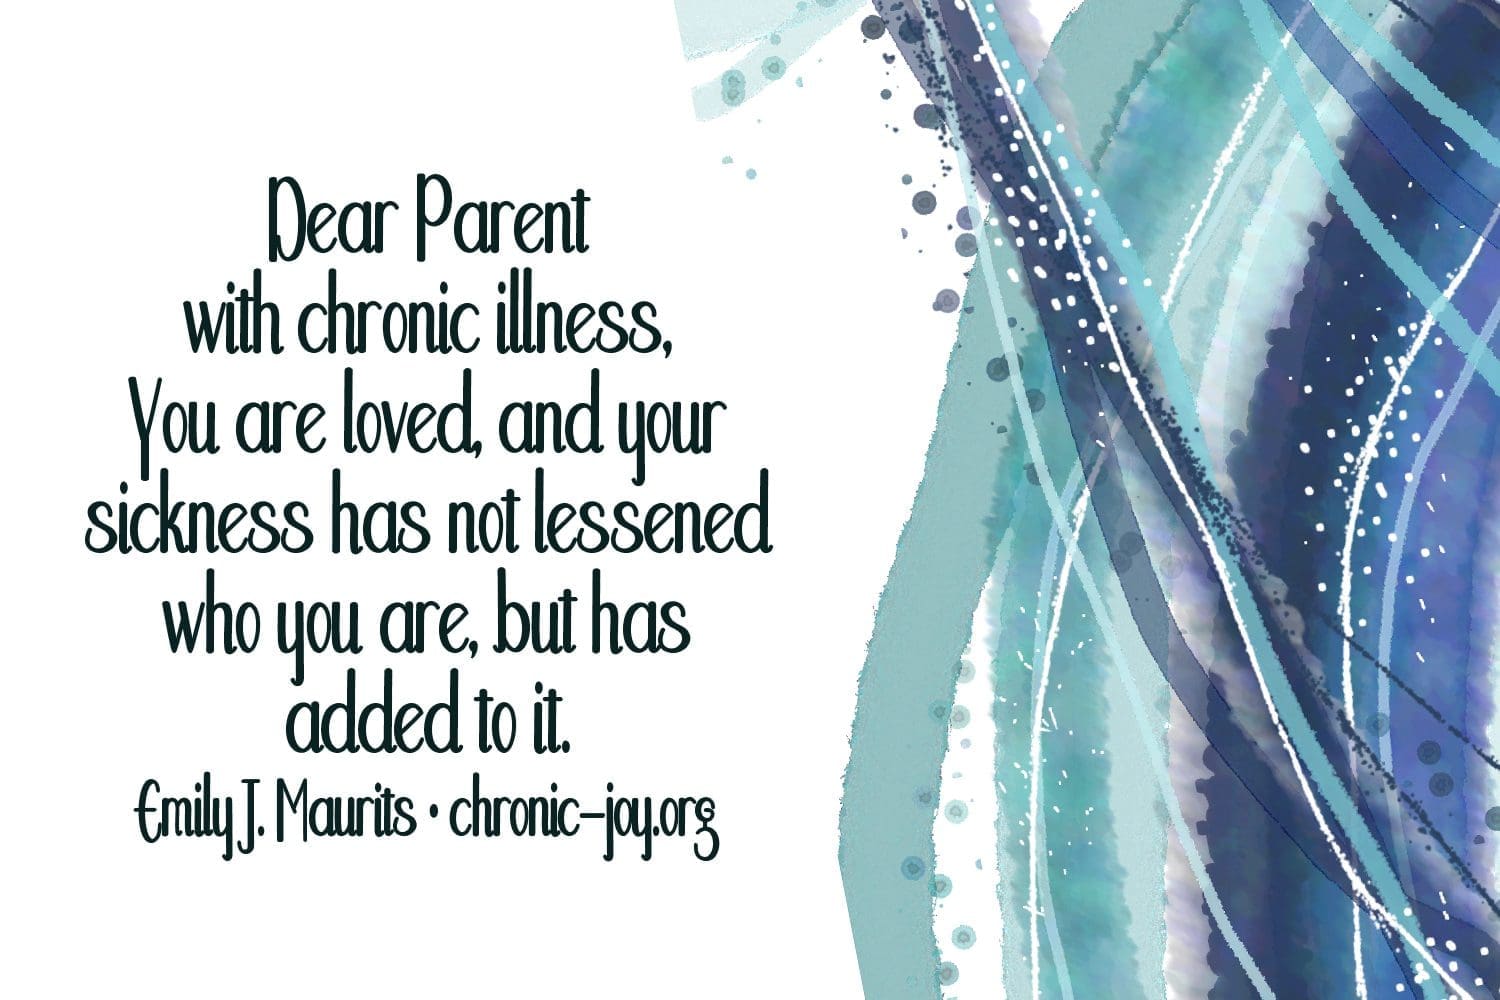 Parents with Chronic Illness • A Love Letter